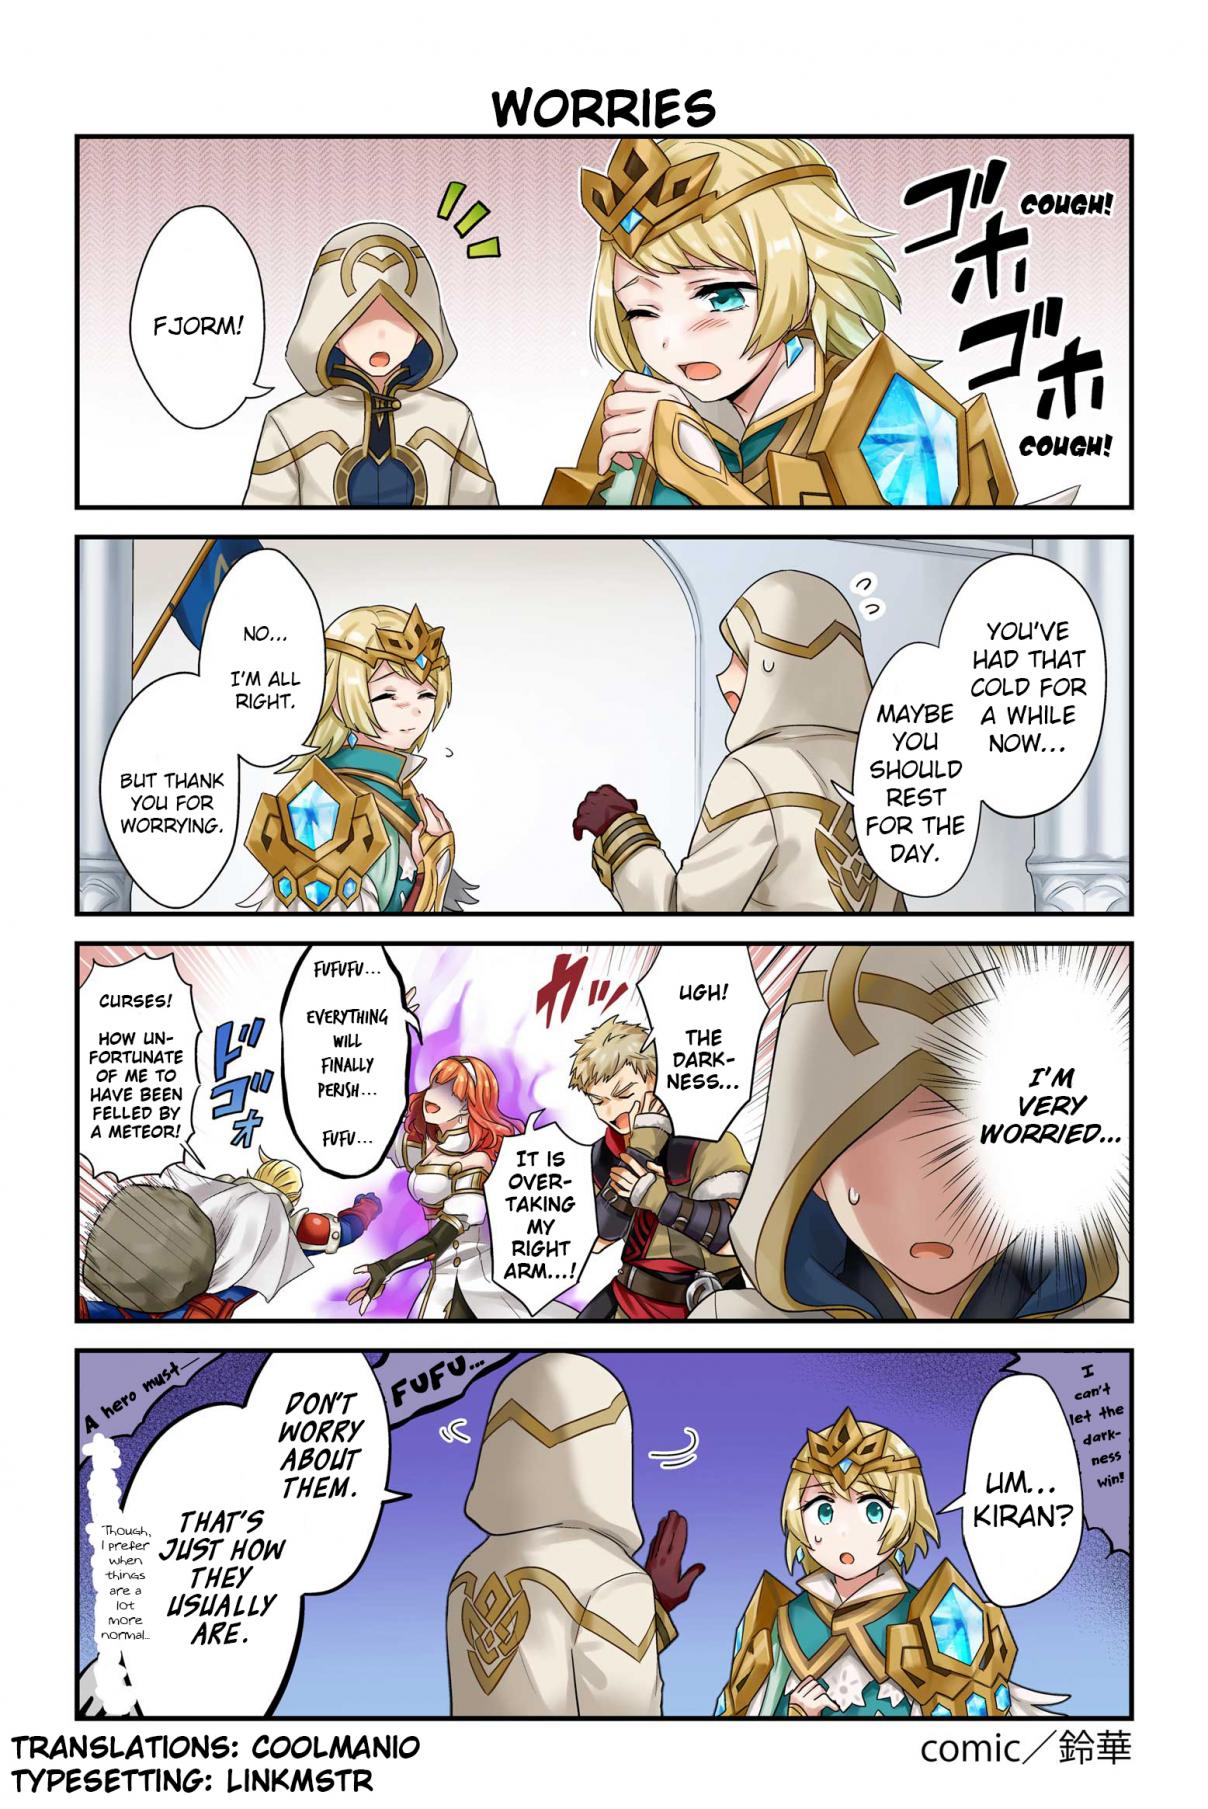 Fire Emblem Heroes: Daily Lives of the Heroes Ch. 65 Worries